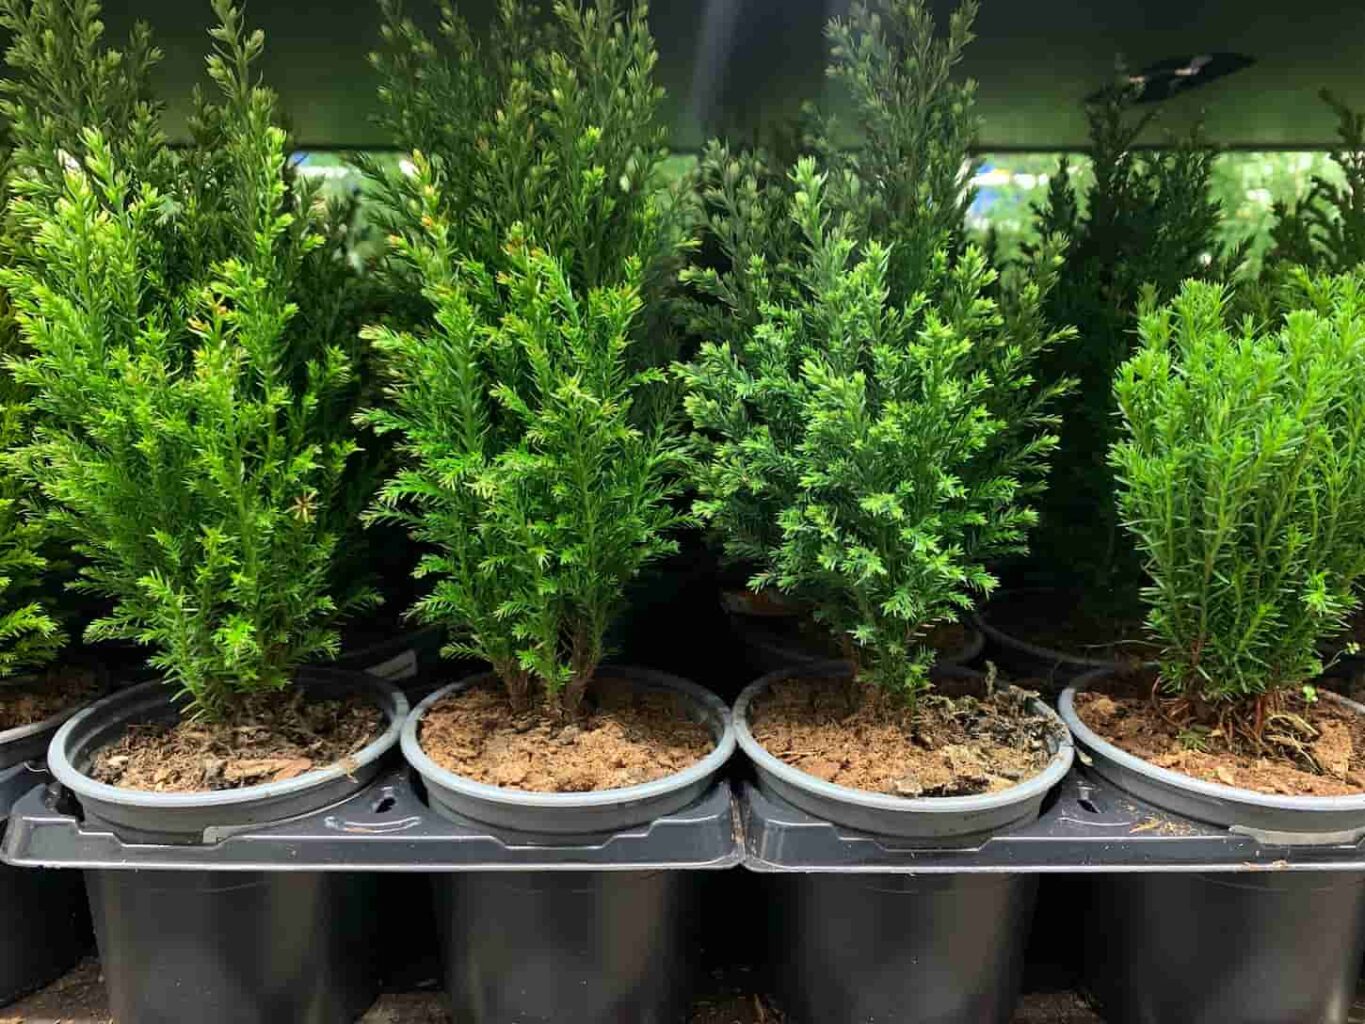 An image of cypress spruce sprouting small bushes in pots with soil.